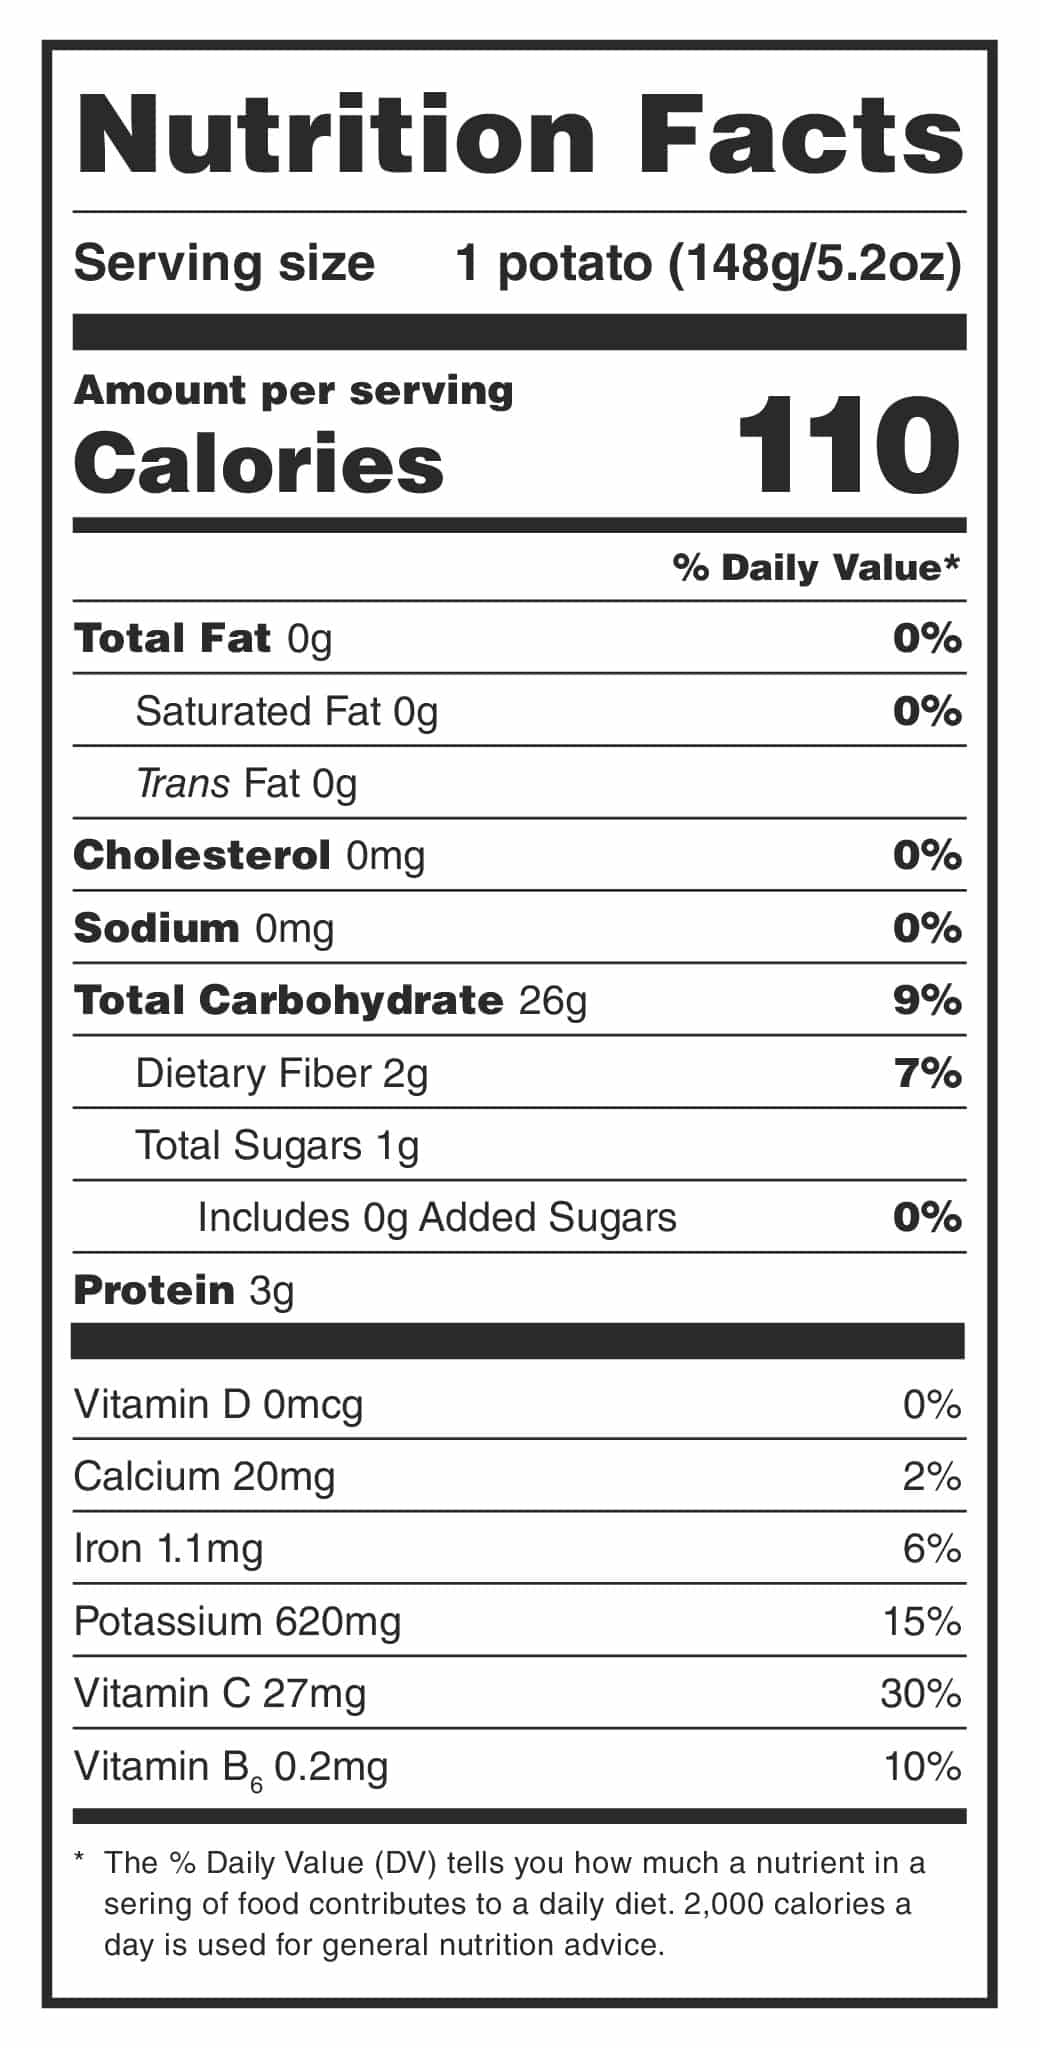 Updated-Potato-Nutrition-Facts-Label.jpg